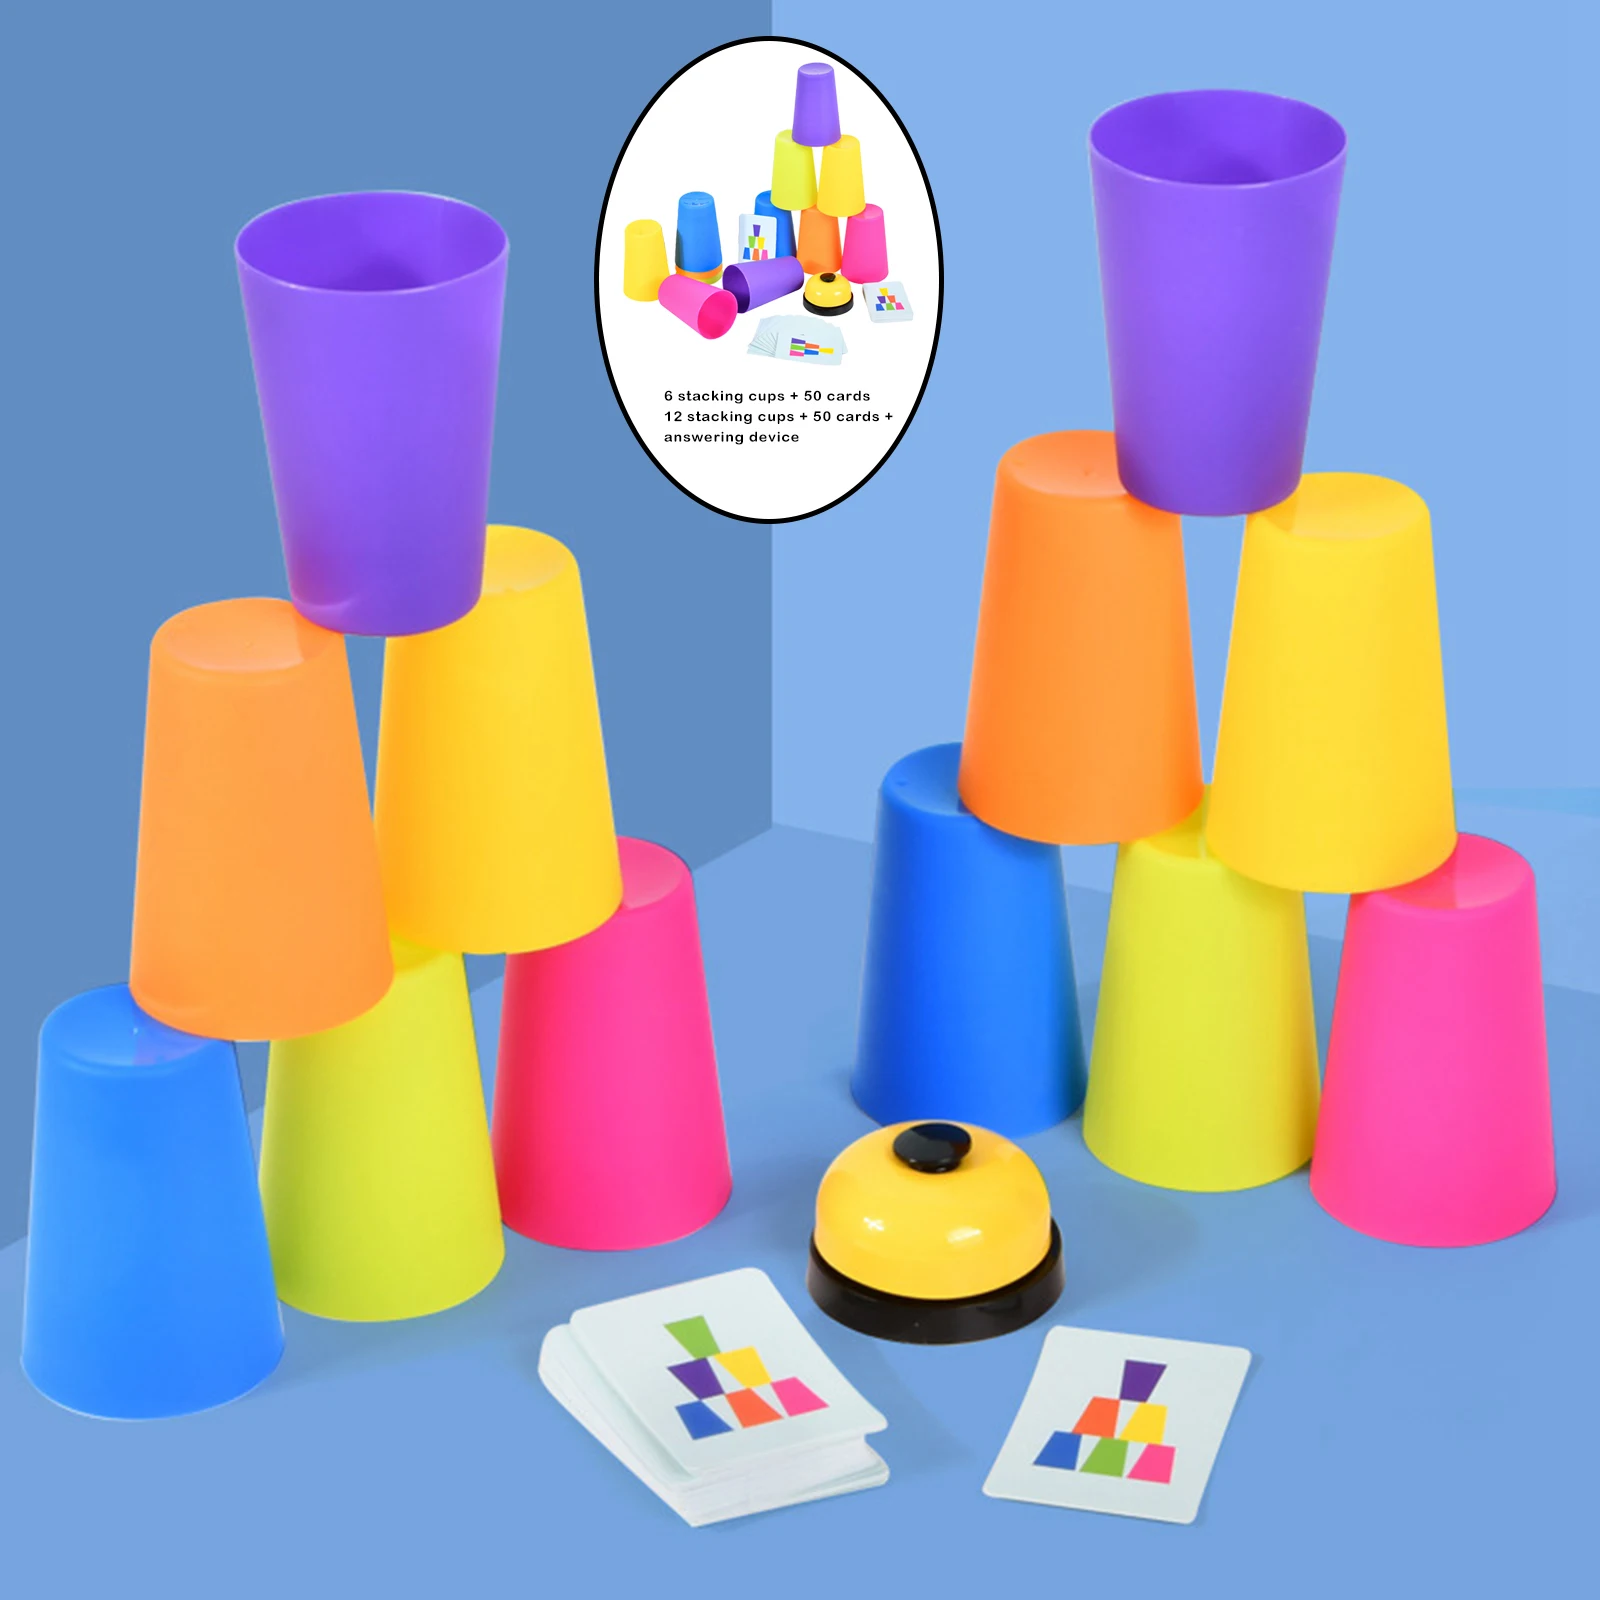 Baby Stacking Toy Table Game Developmenatal Baby Toys Classic Family Game Gifts